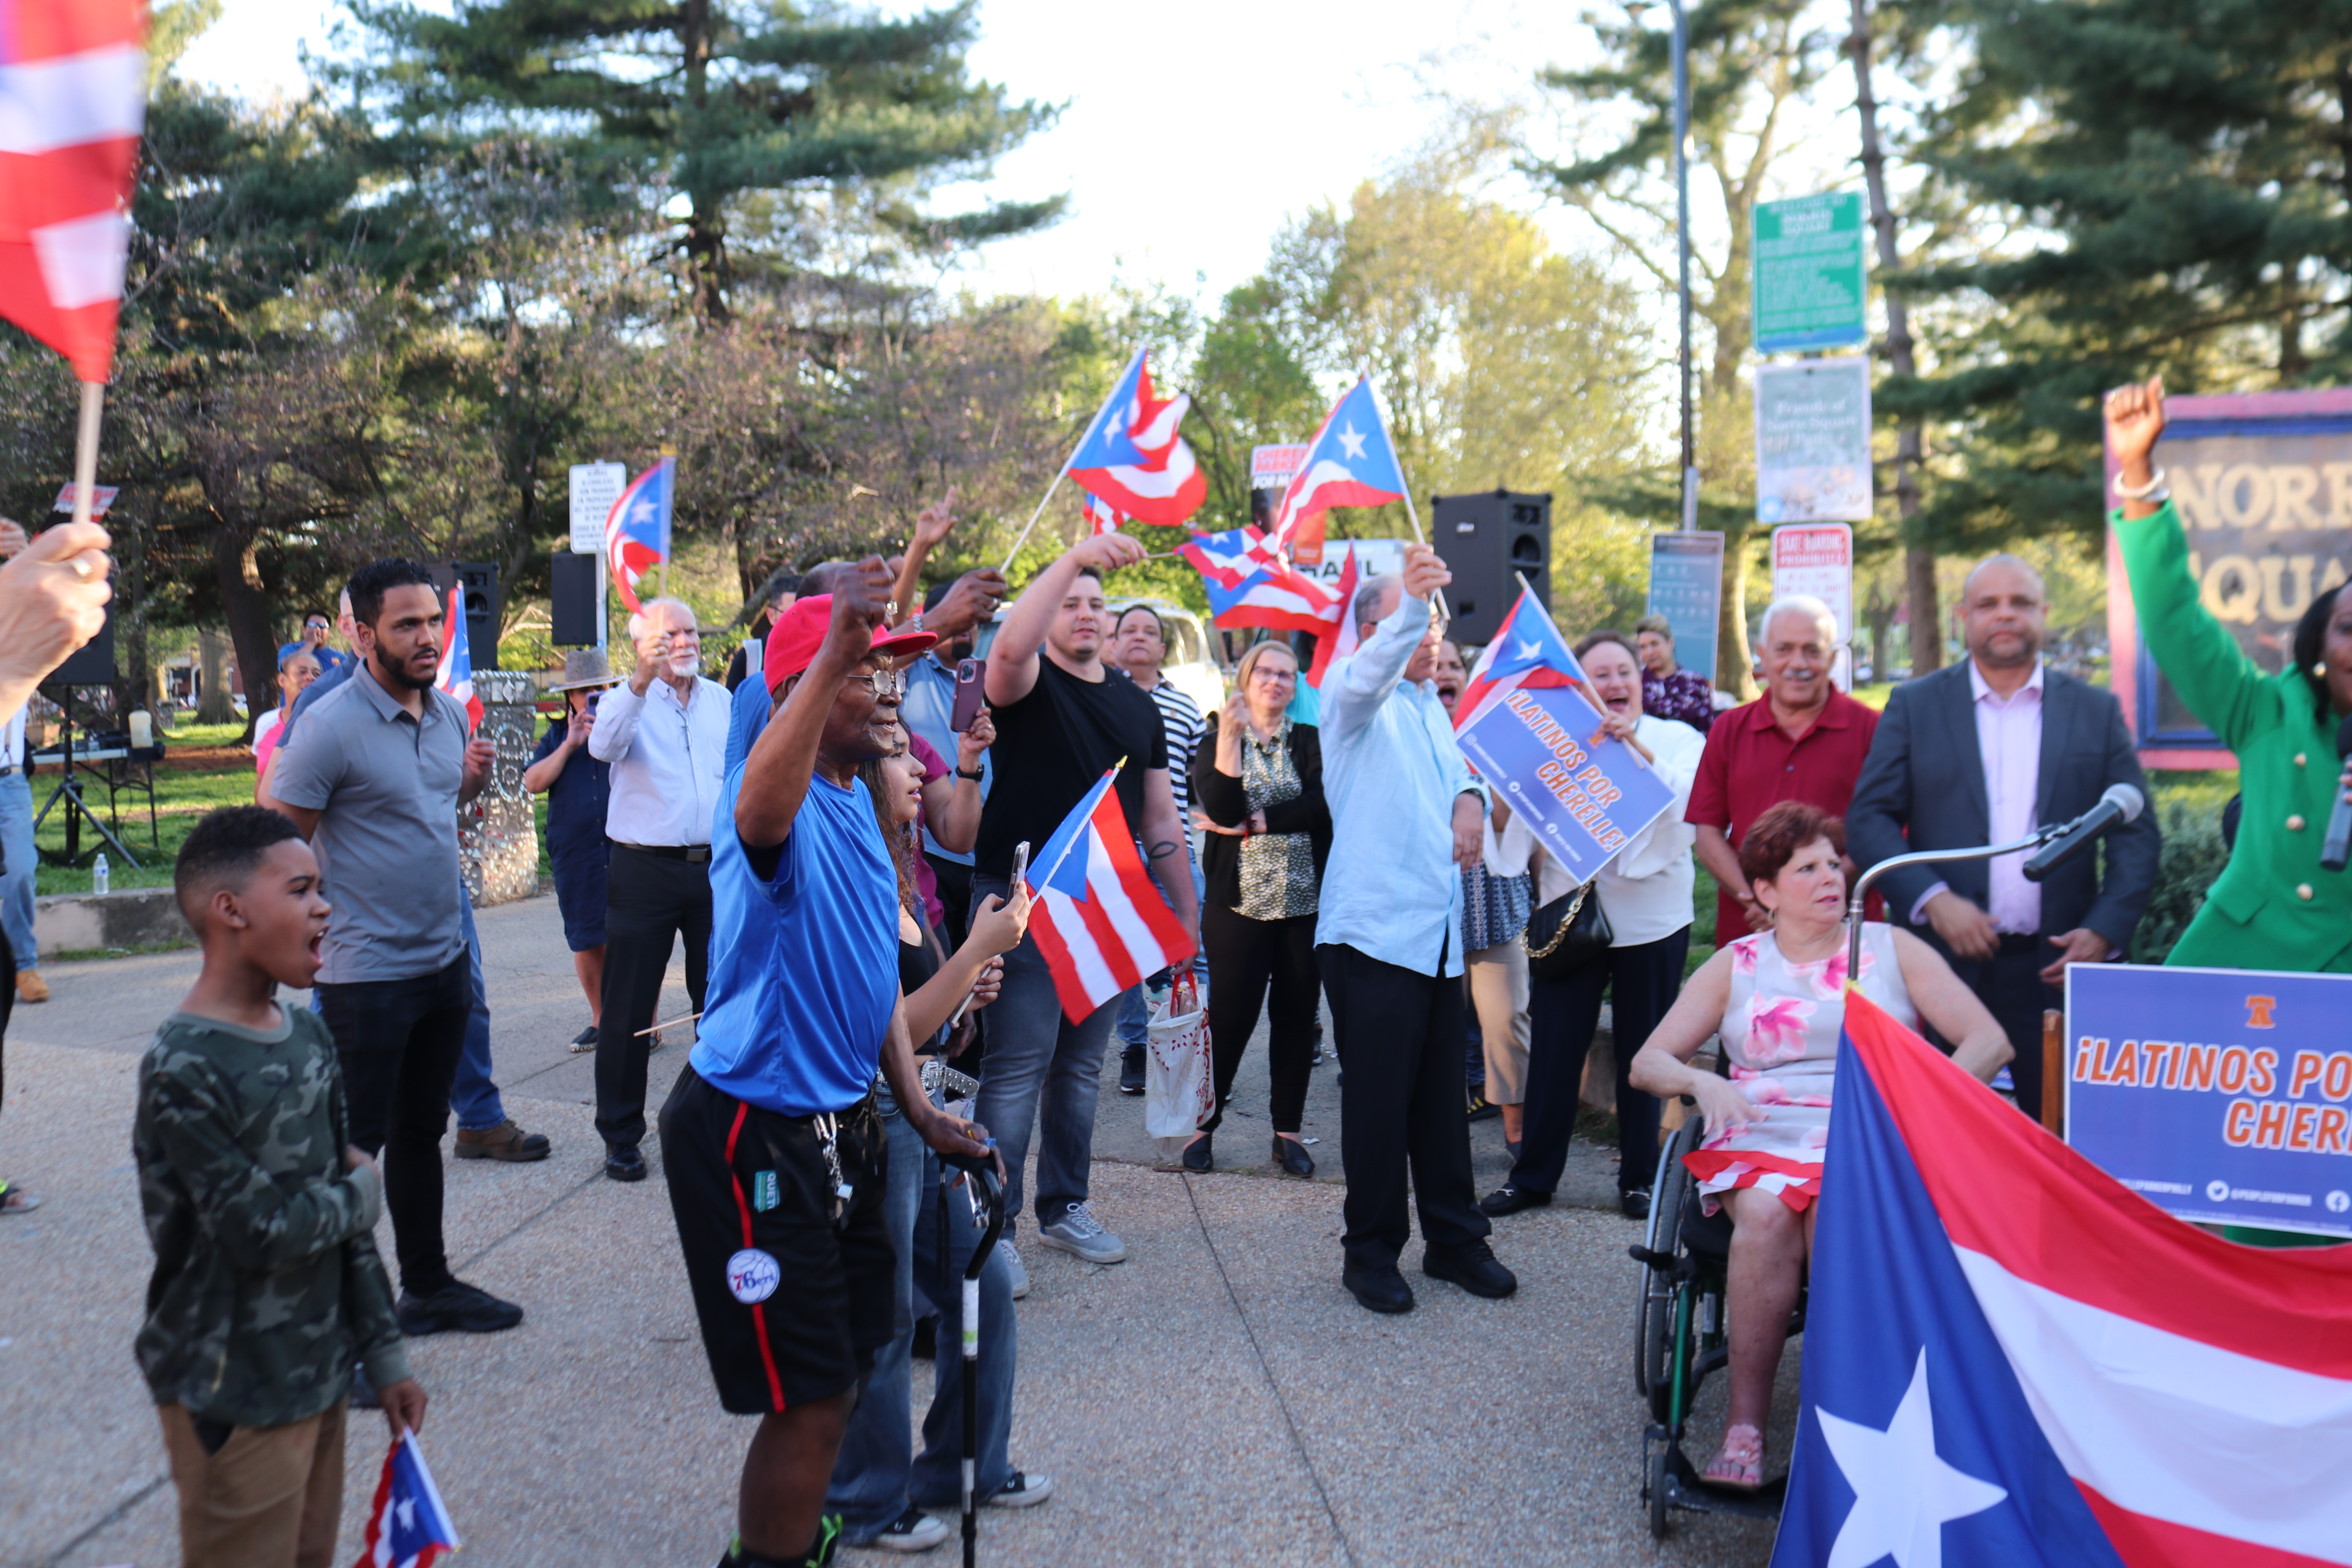 Crowd gathered at Norris Square to attend Cherelle Parker's endorsement. Photo: Carlos Nogueras / AL DÍA News